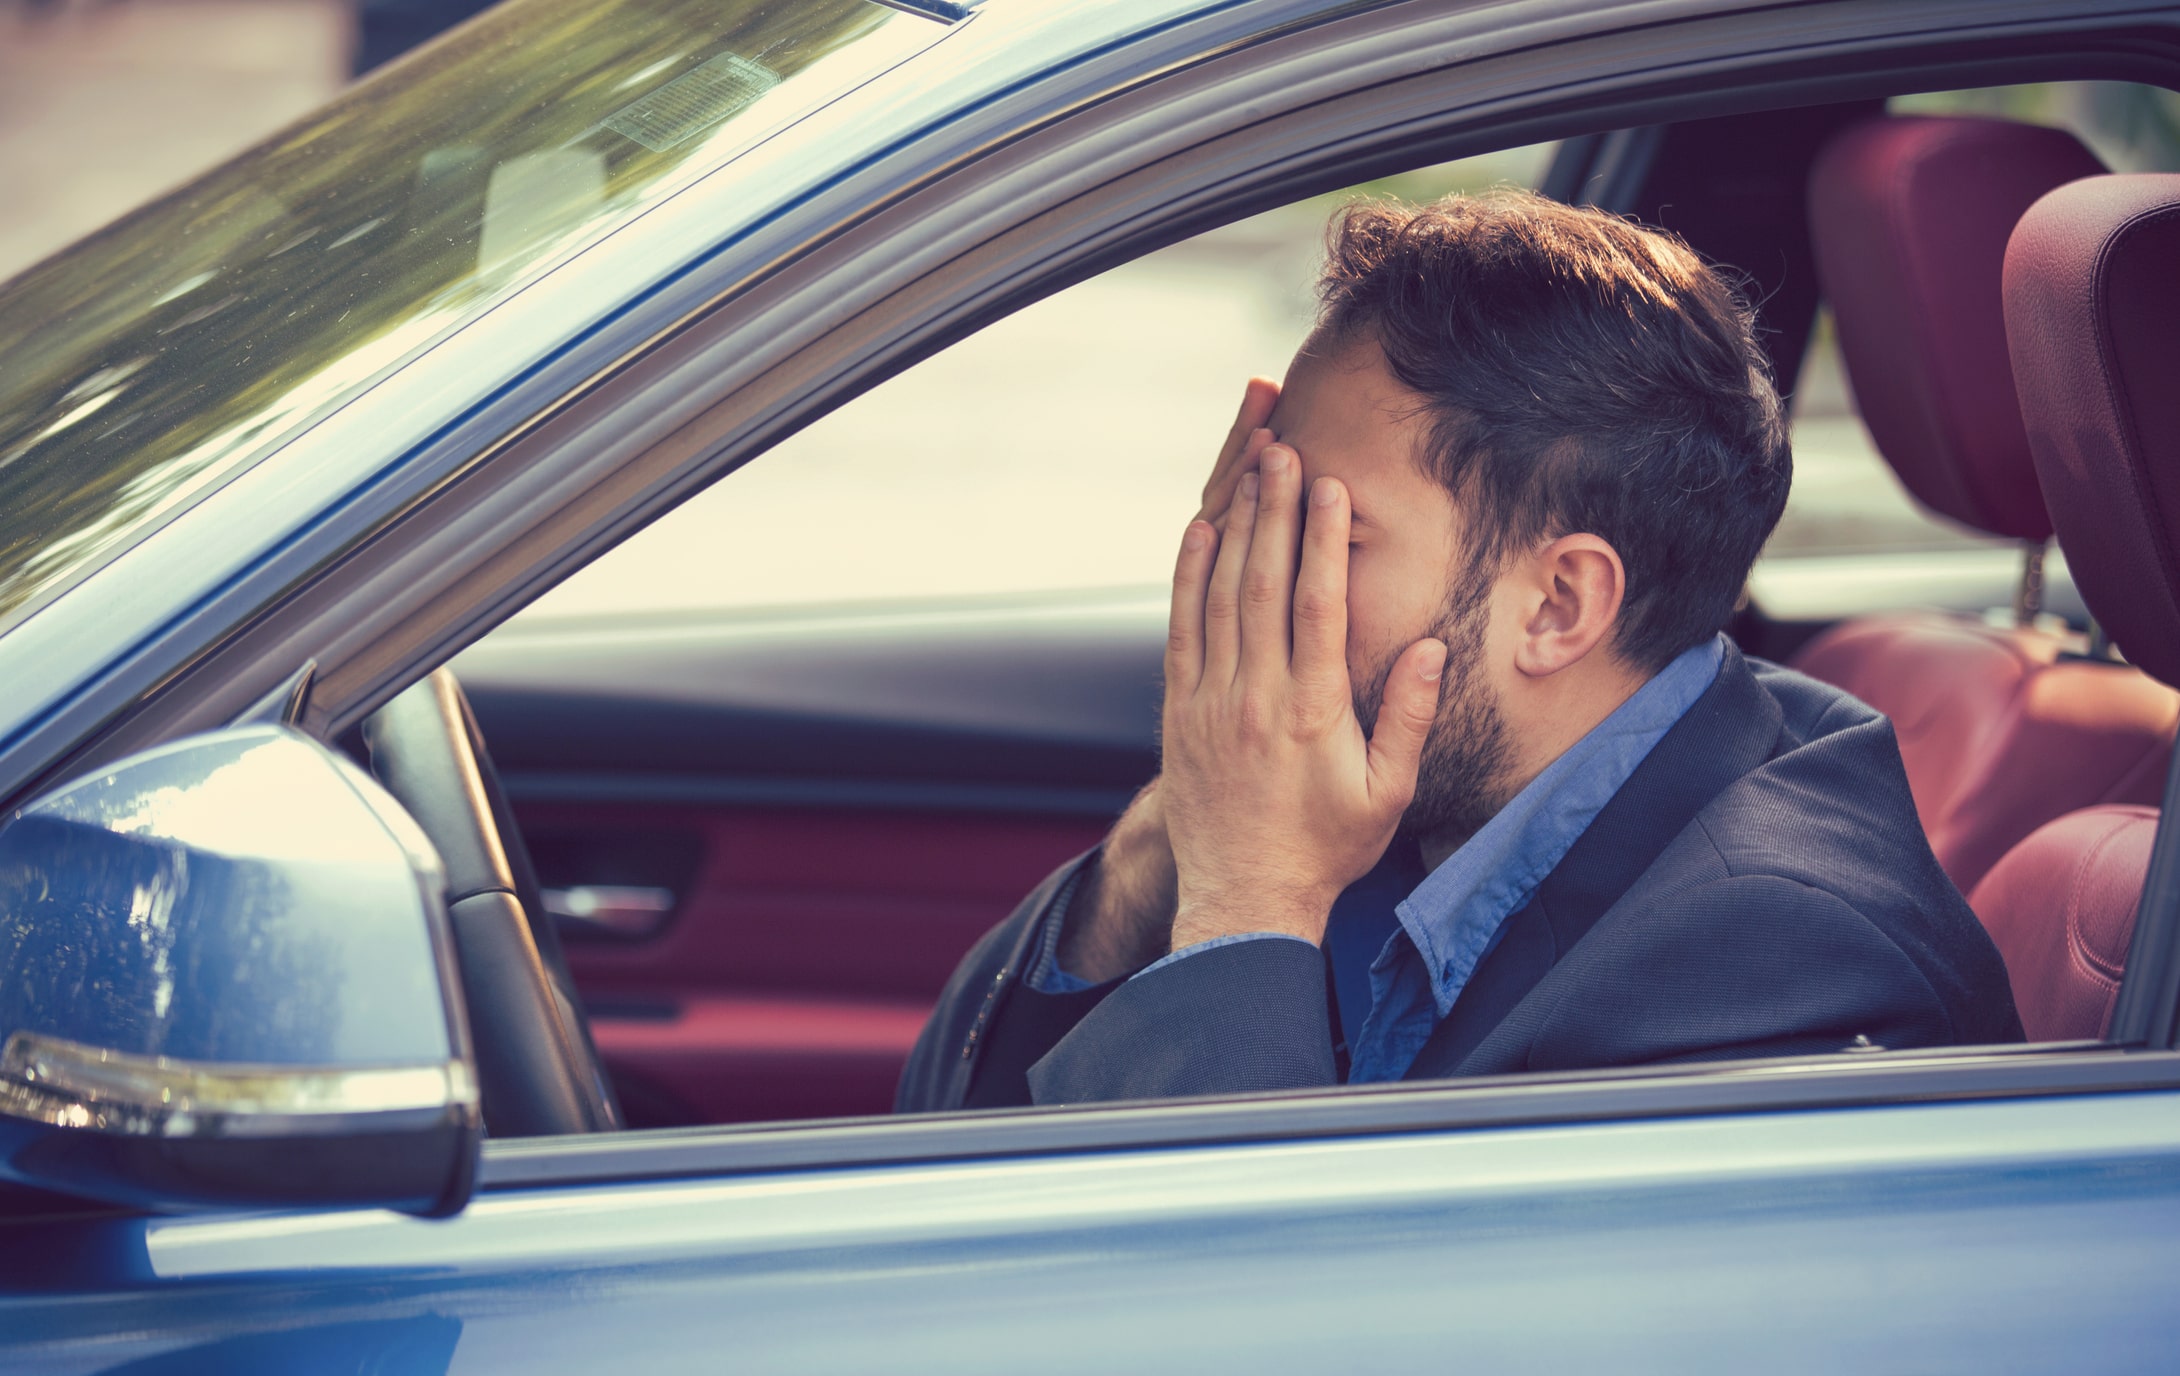 Houston Drowsy Driving Attorney